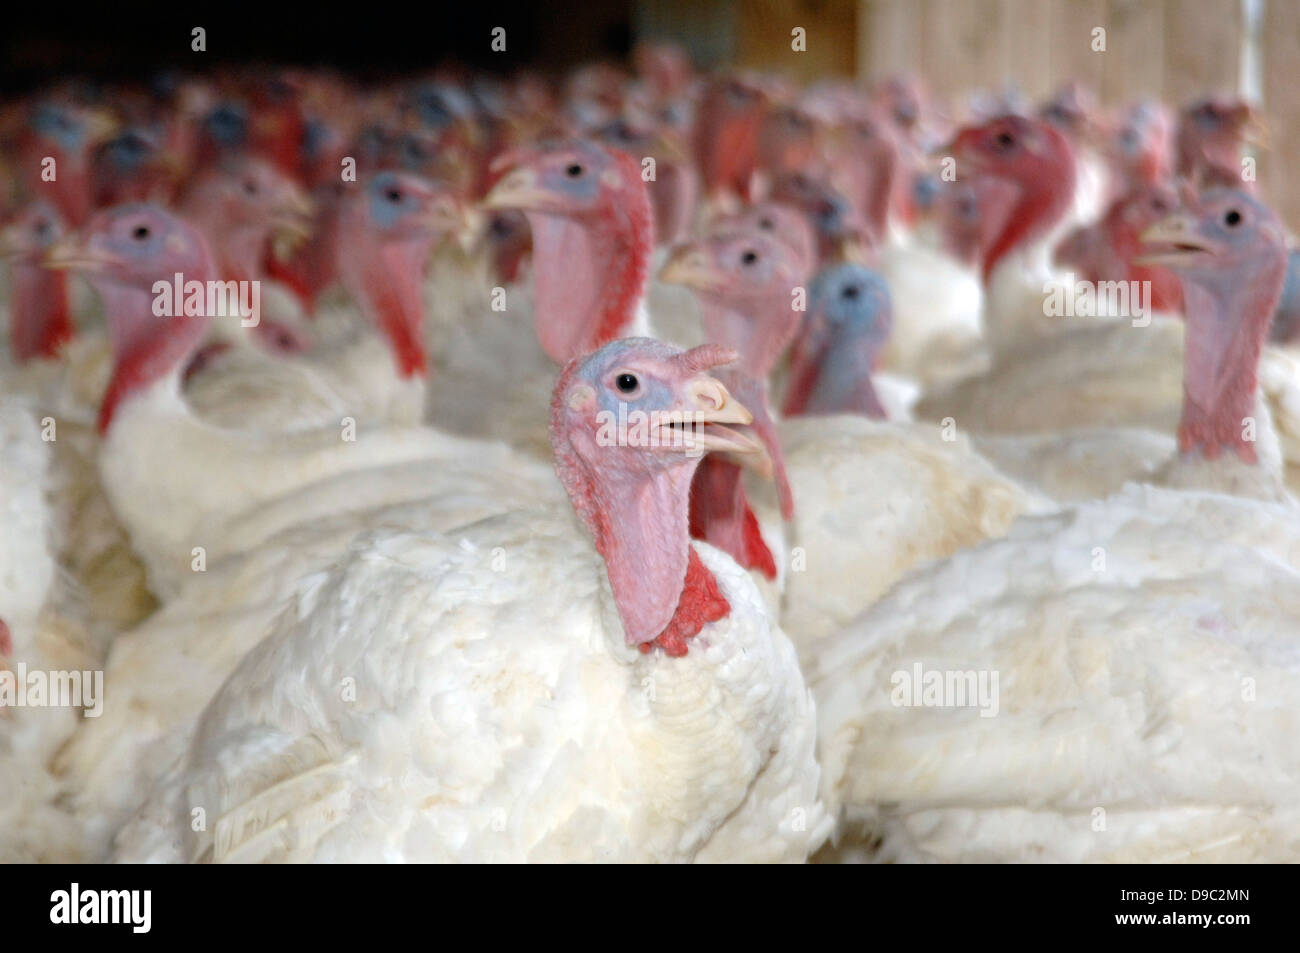 Farm-bred domesticated turkeys gather in a poultry house September 9, 2008 in Rockingham County, Virginia. Stock Photo